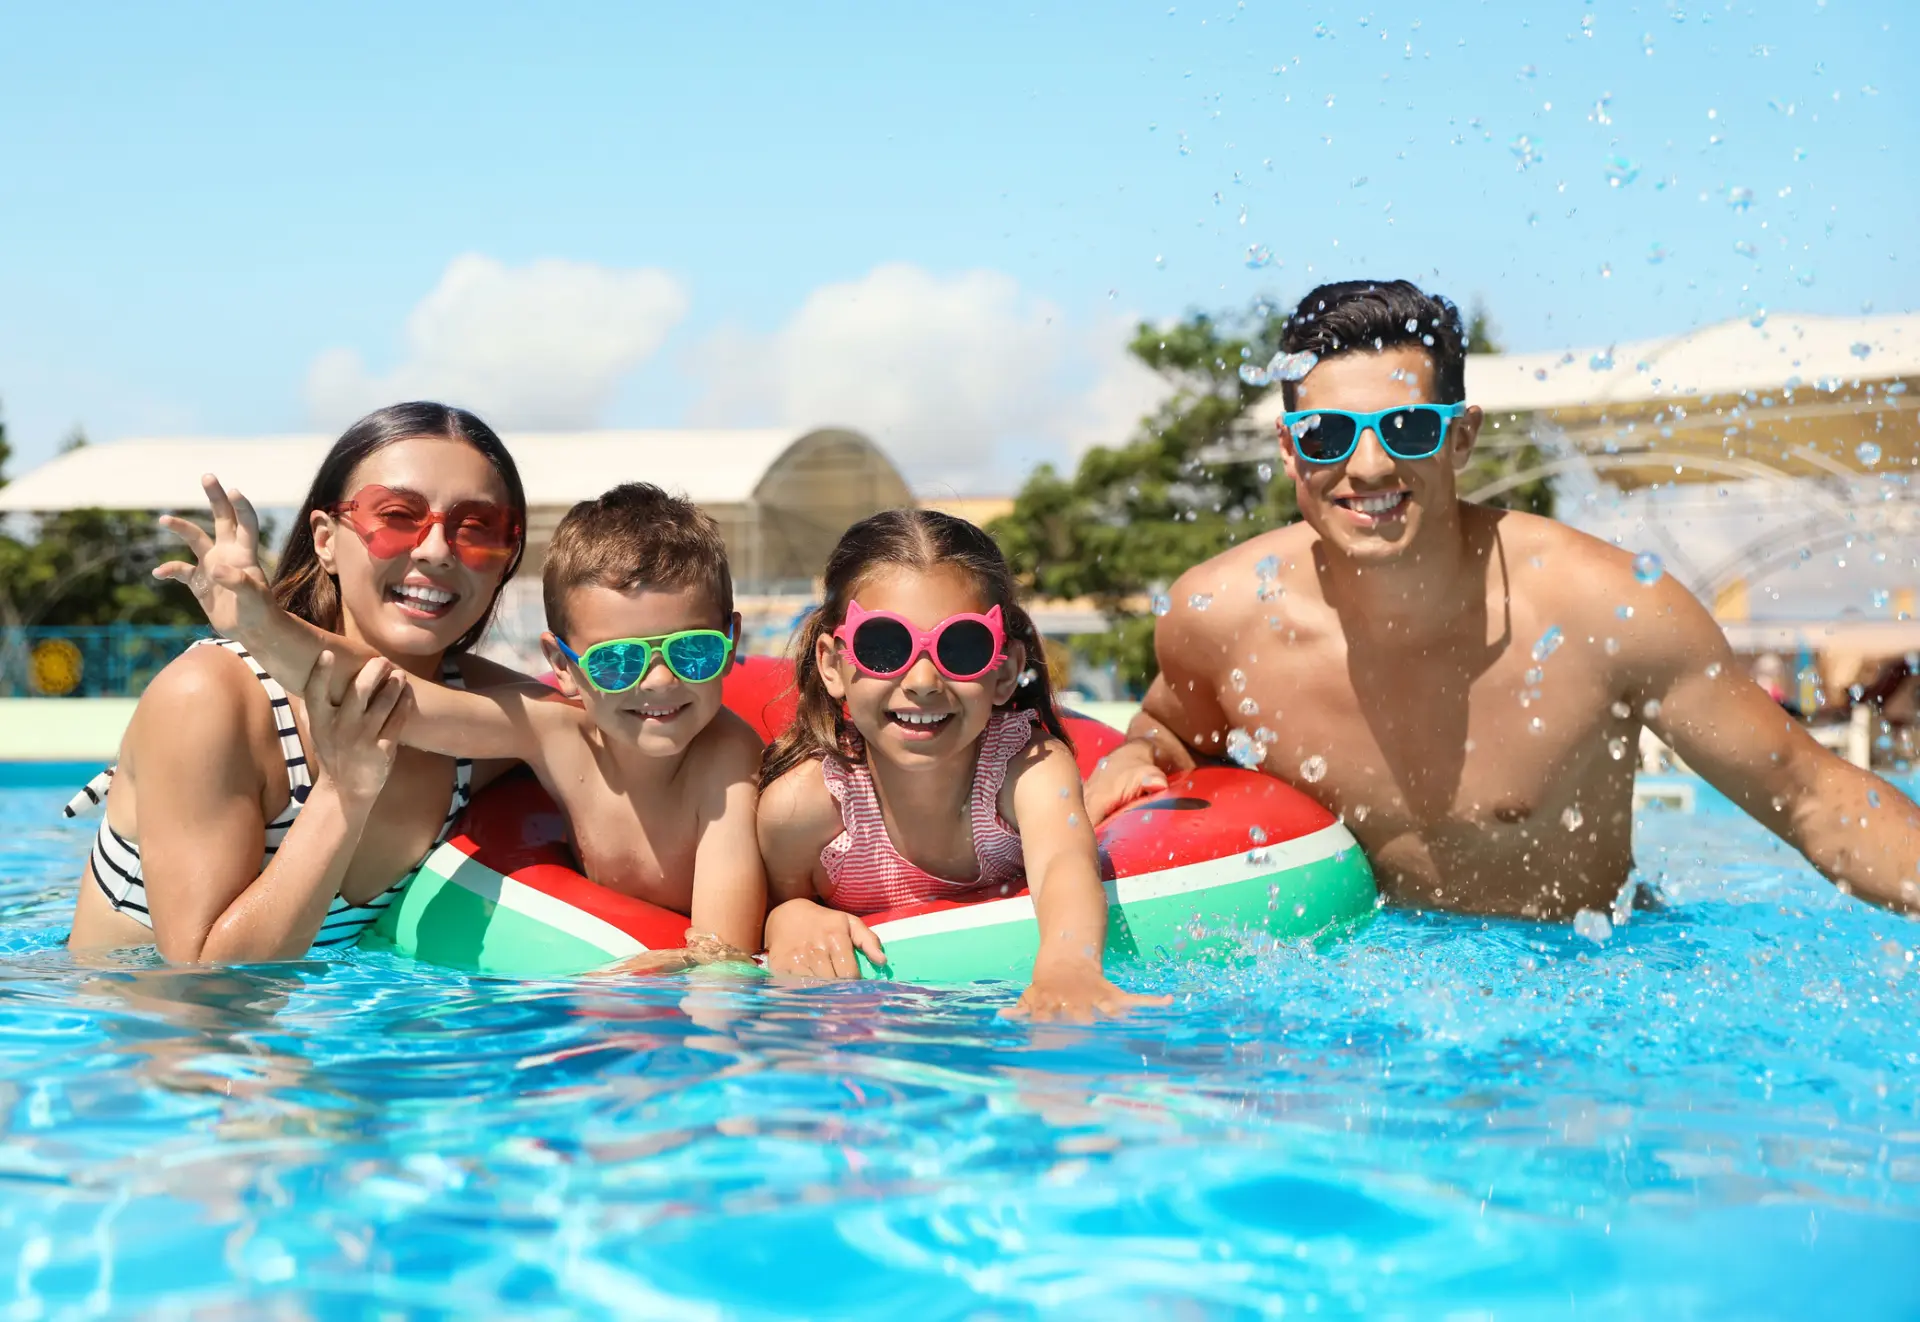 A family of four enjoy being in the pool in order to maximize time together on vacation.